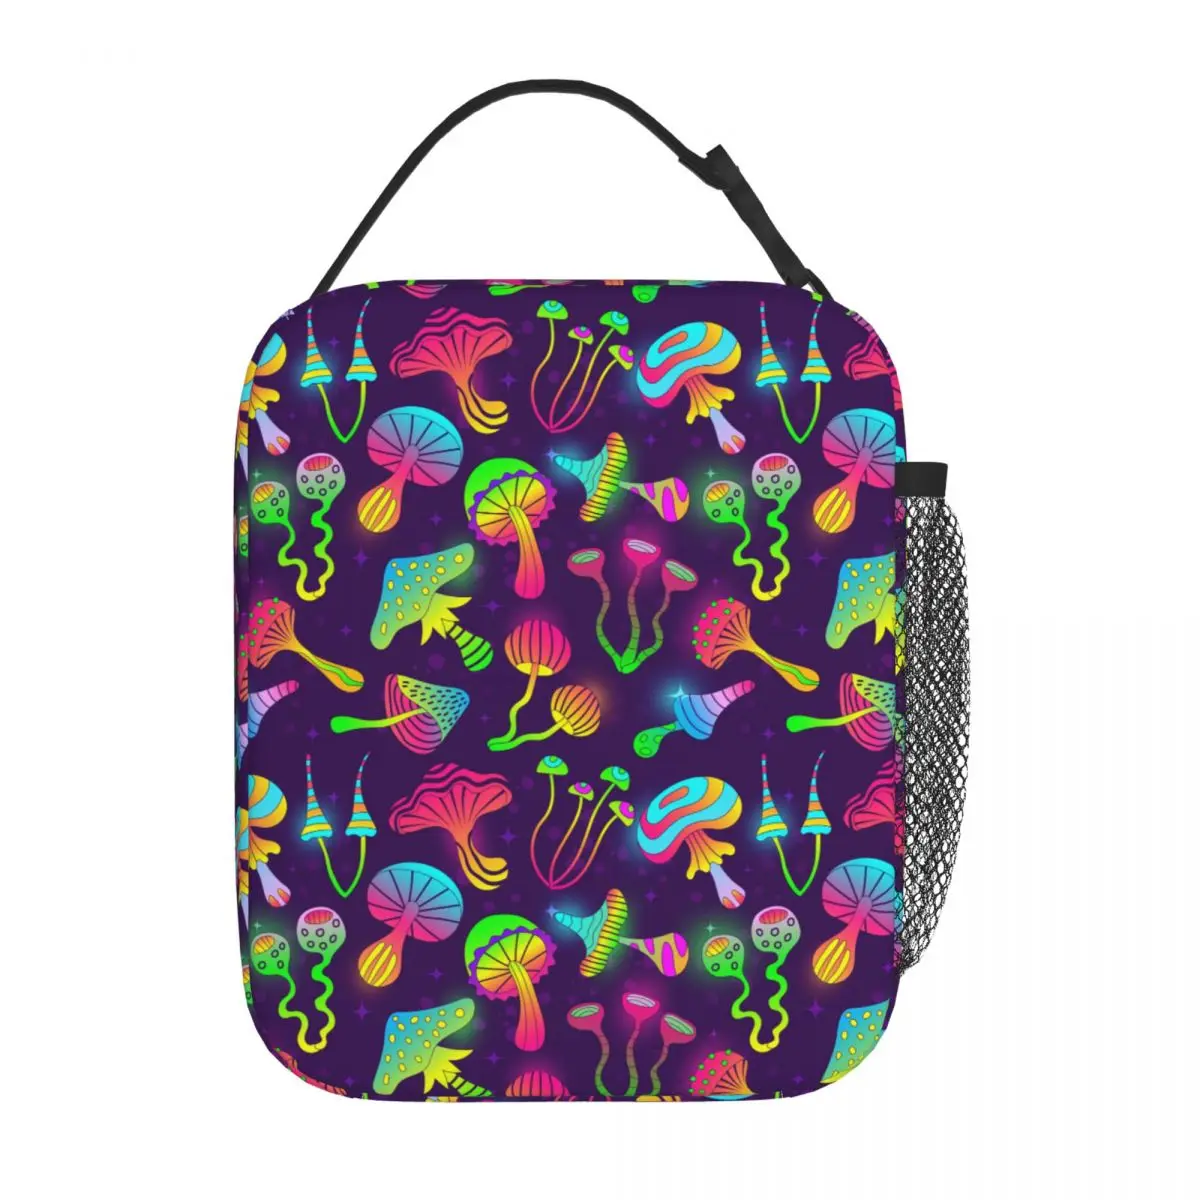 

Neon Psychodelic Mushrooms Thermal Insulated Lunch Bag School Aesthetic Mushroom Portable Bento Box Thermal Cooler Food Box